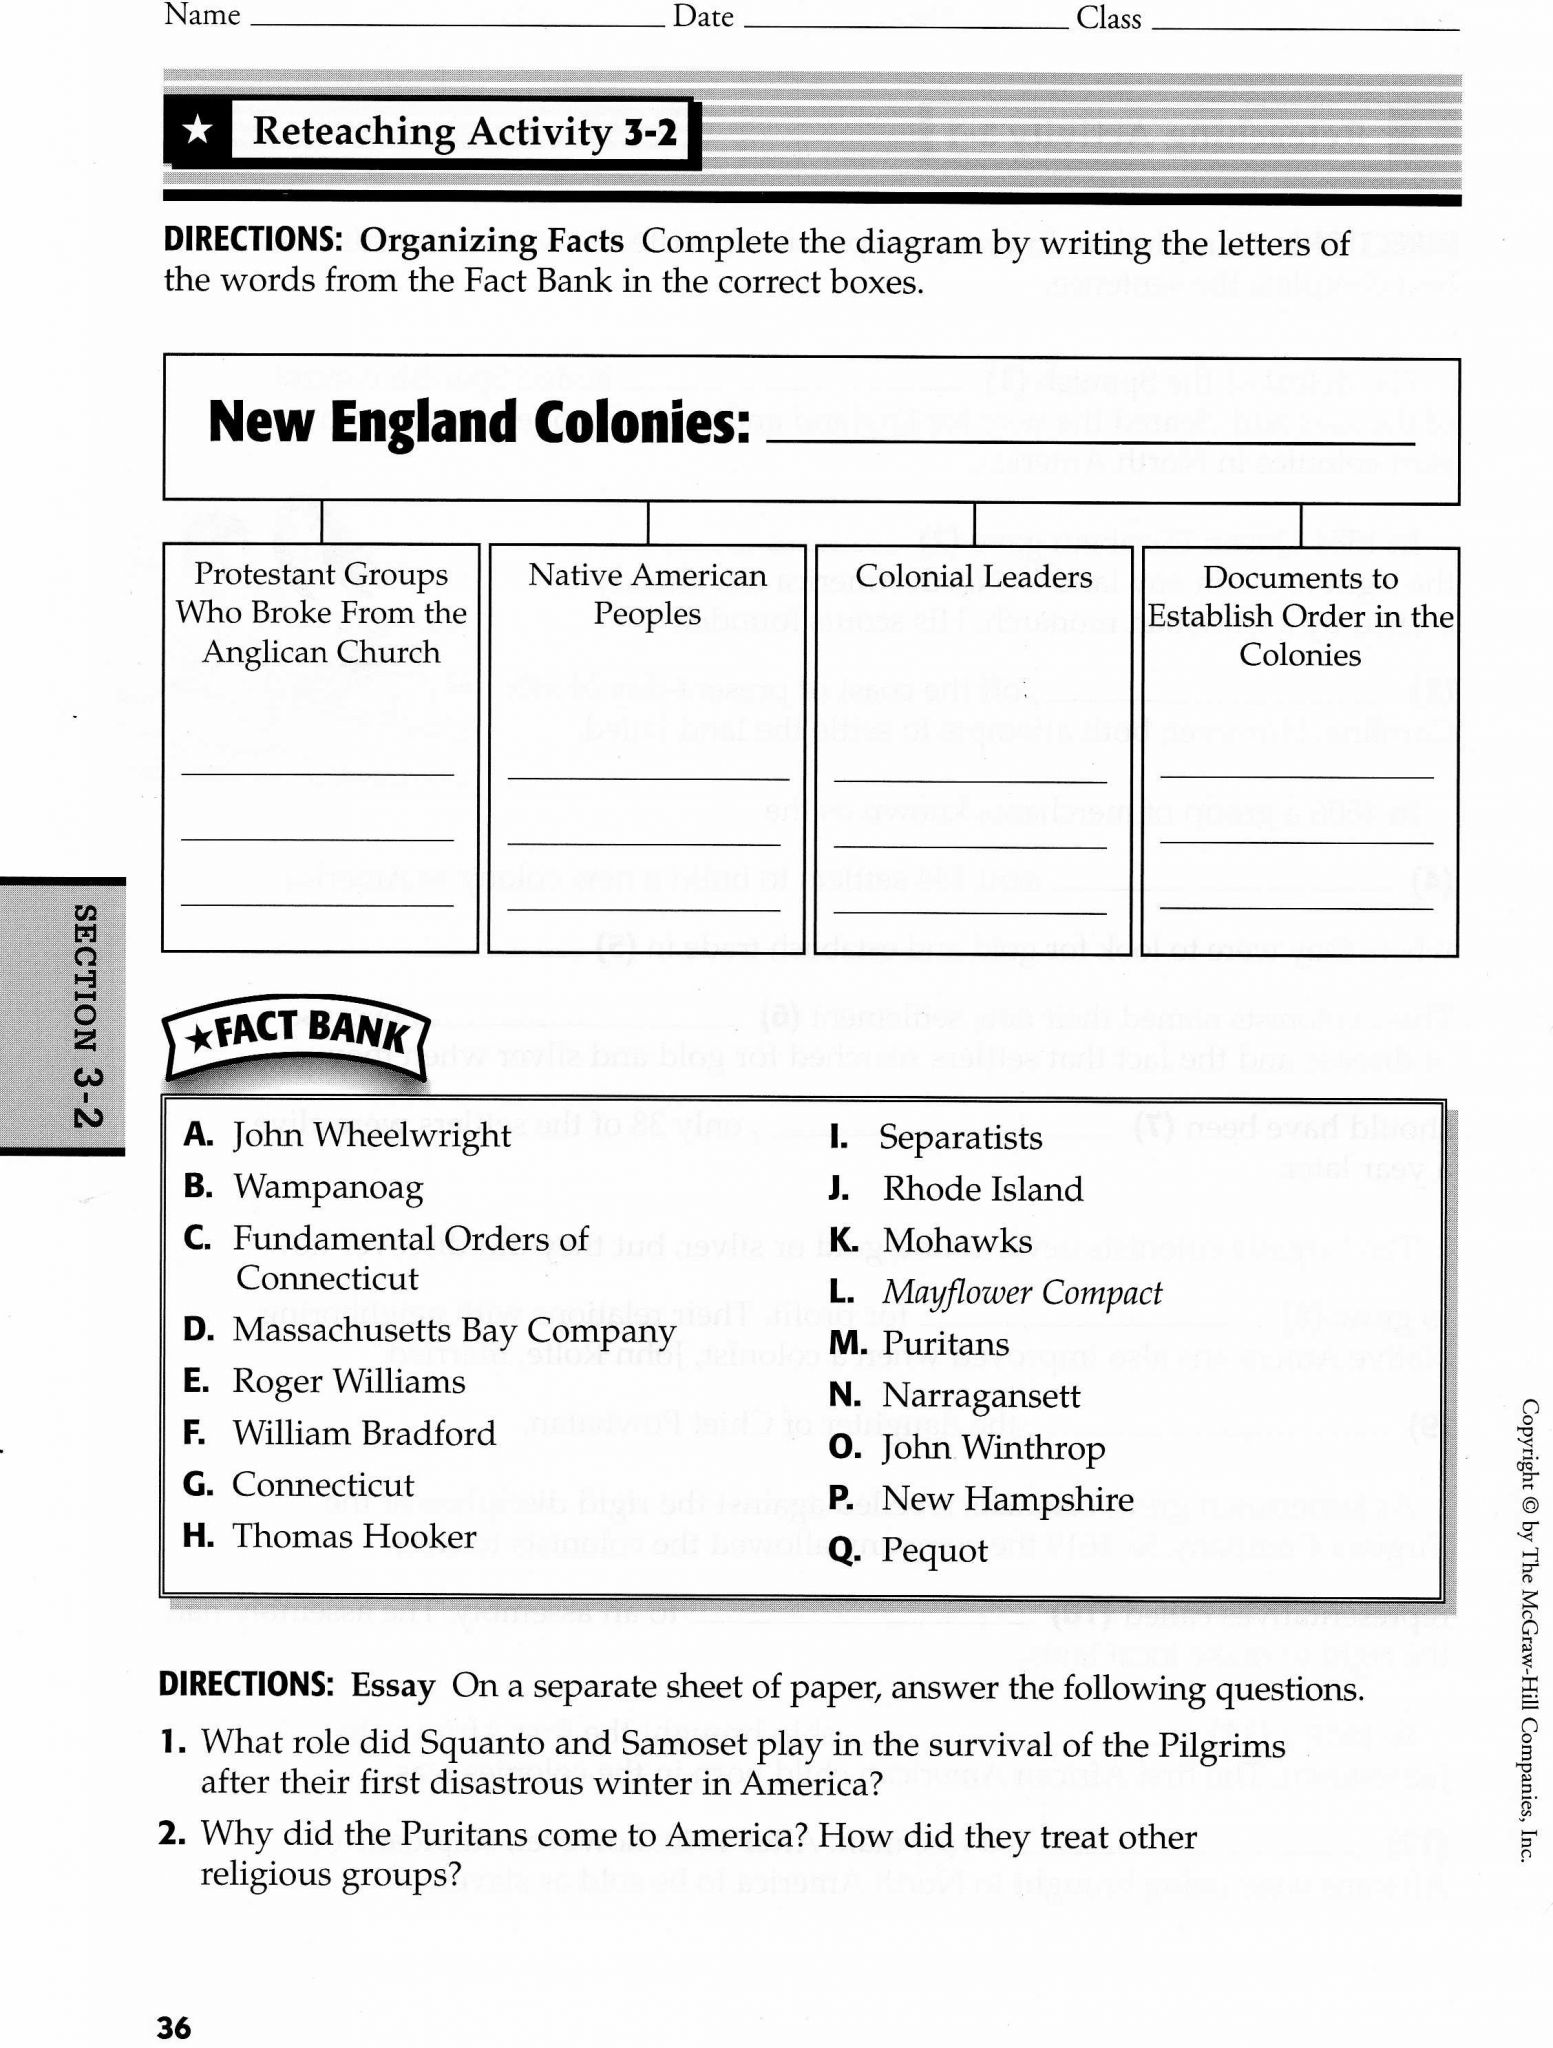 Legislative Branch Worksheet Middle School Also Icivics Judicial Branch In A Flash Worksheet Answers